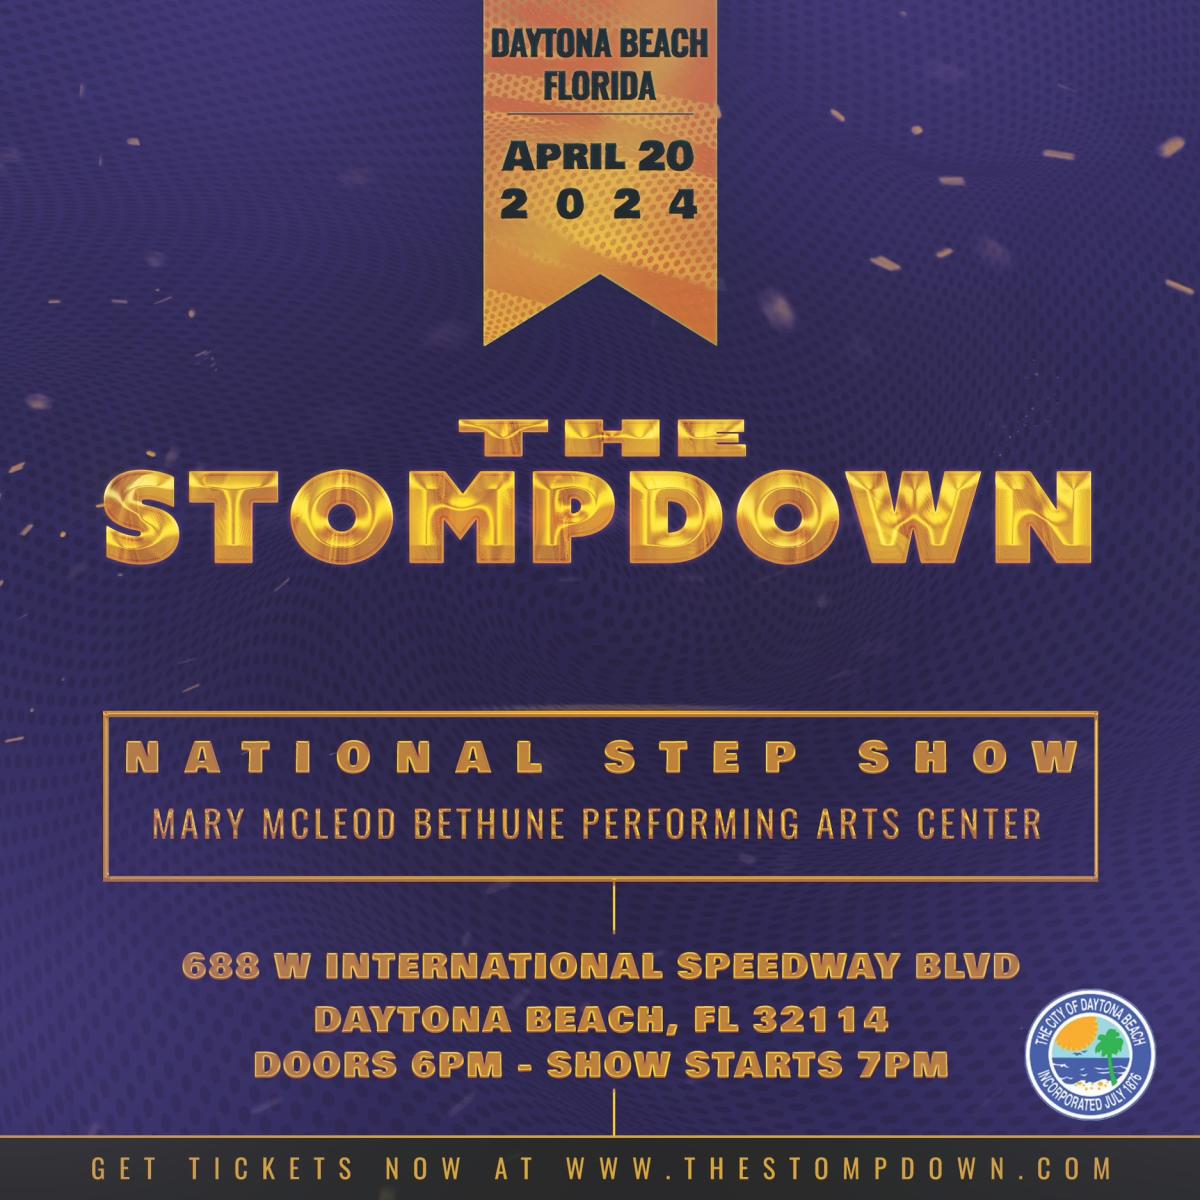 On April 20, enjoy an electrifying evening of music and dance at The Stompdown, a national step show comprised of the nation’s elite step teams. Mary McLeod Bethune Performing Arts Center, Daytona Beach. 7 pm. Details: bit.ly/4alk3kx #LoveDaytonaBeach🏖️ #LoveFL☀️